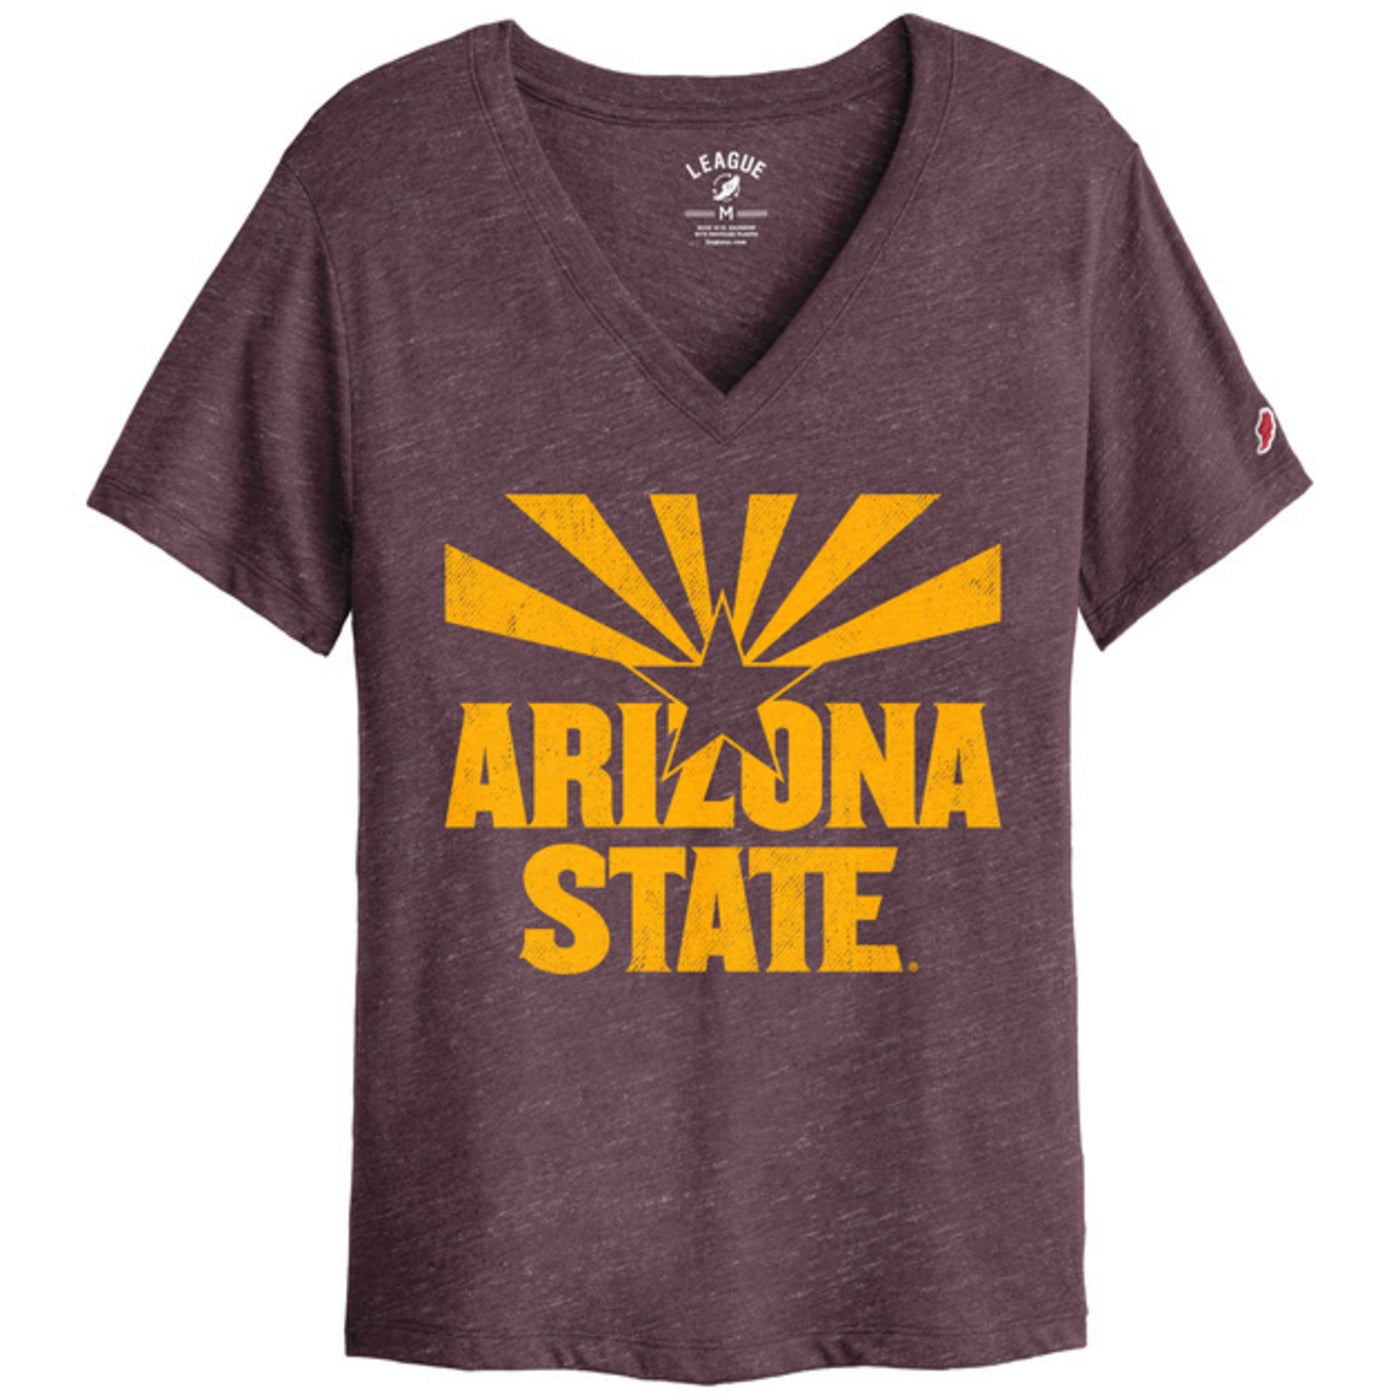 ASU v-neck maroon shirt with Gold Arizona state flag outline above the text 